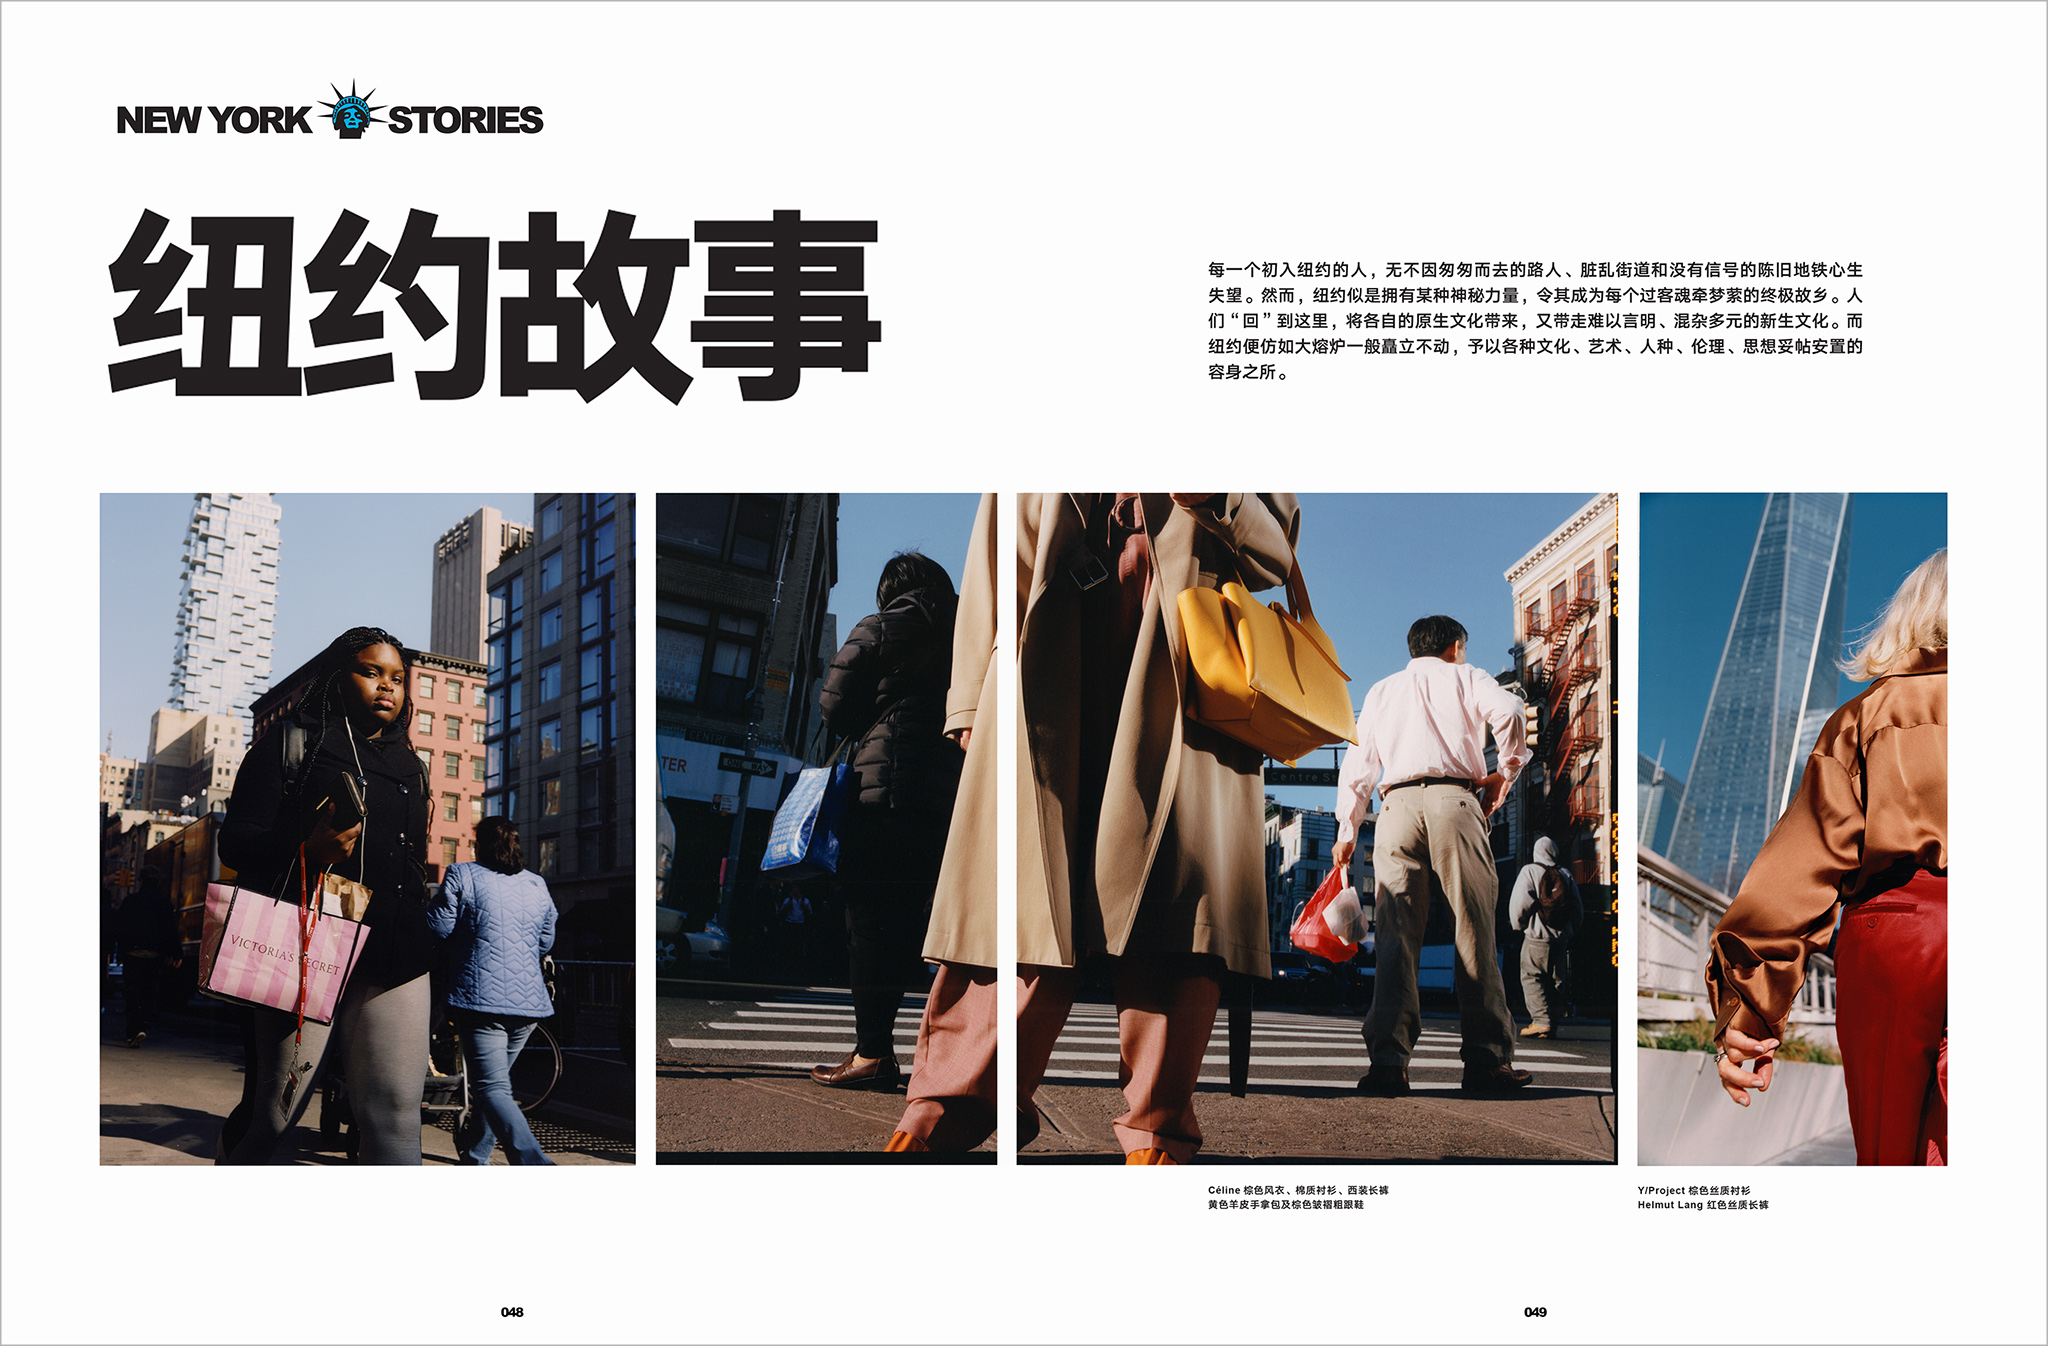 Editorial for the chaos-themed issue of *Modern Weekly China*, shot around the busy Canal Street and Wall Street in Manhattan, New York. *{Styling by Sasha Kelly. Casting by Midlands}* - © Maciek Pożoga